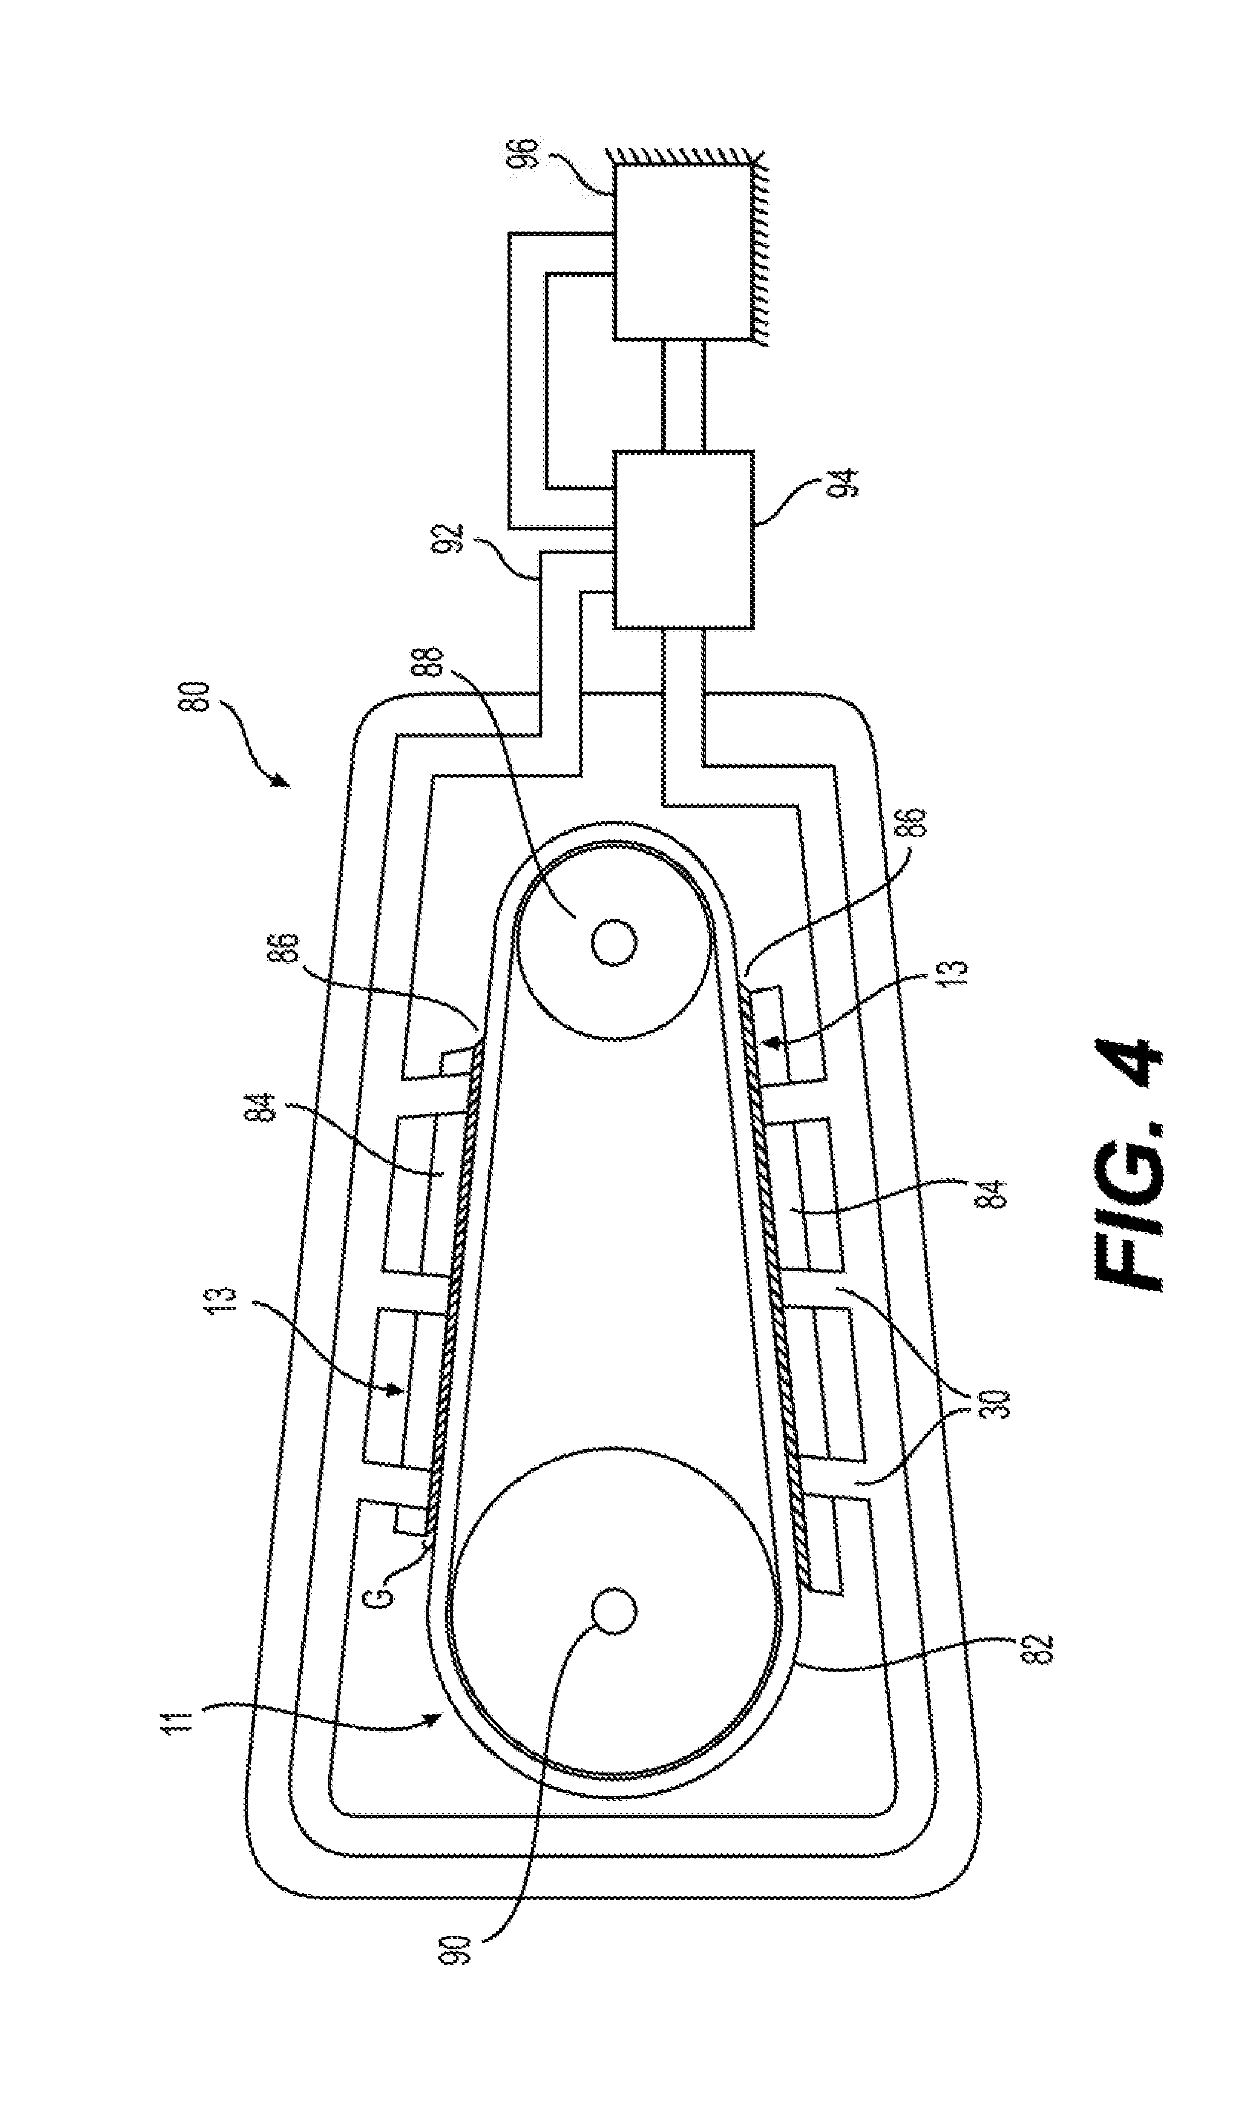 Lubricant supported electric motor